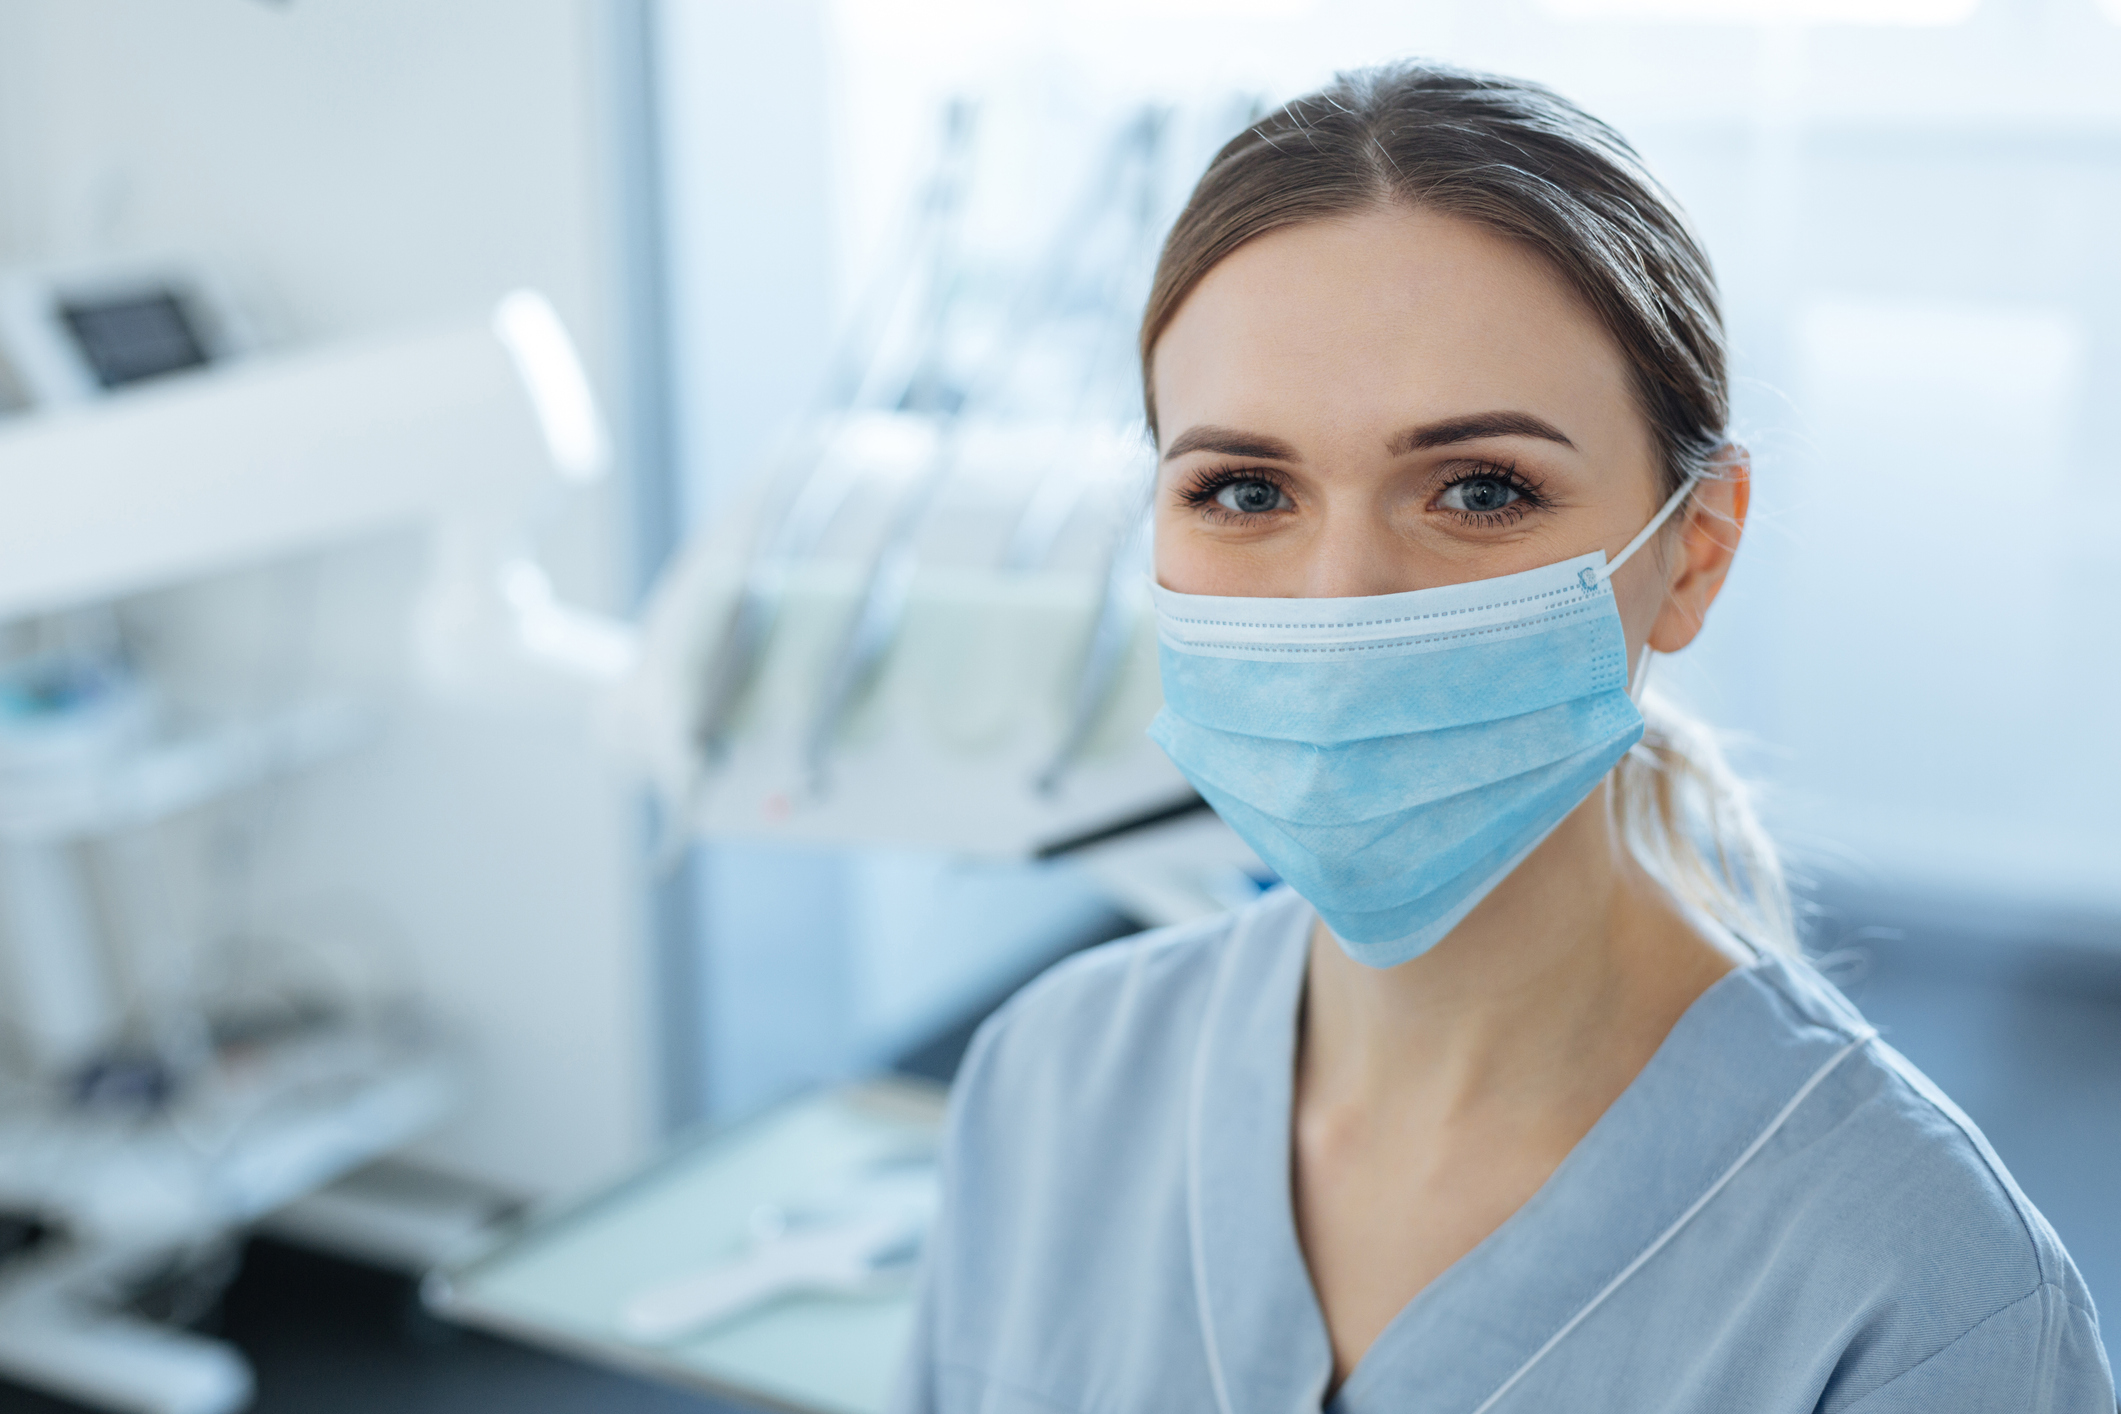 Masks are still required for all in healthcare settings